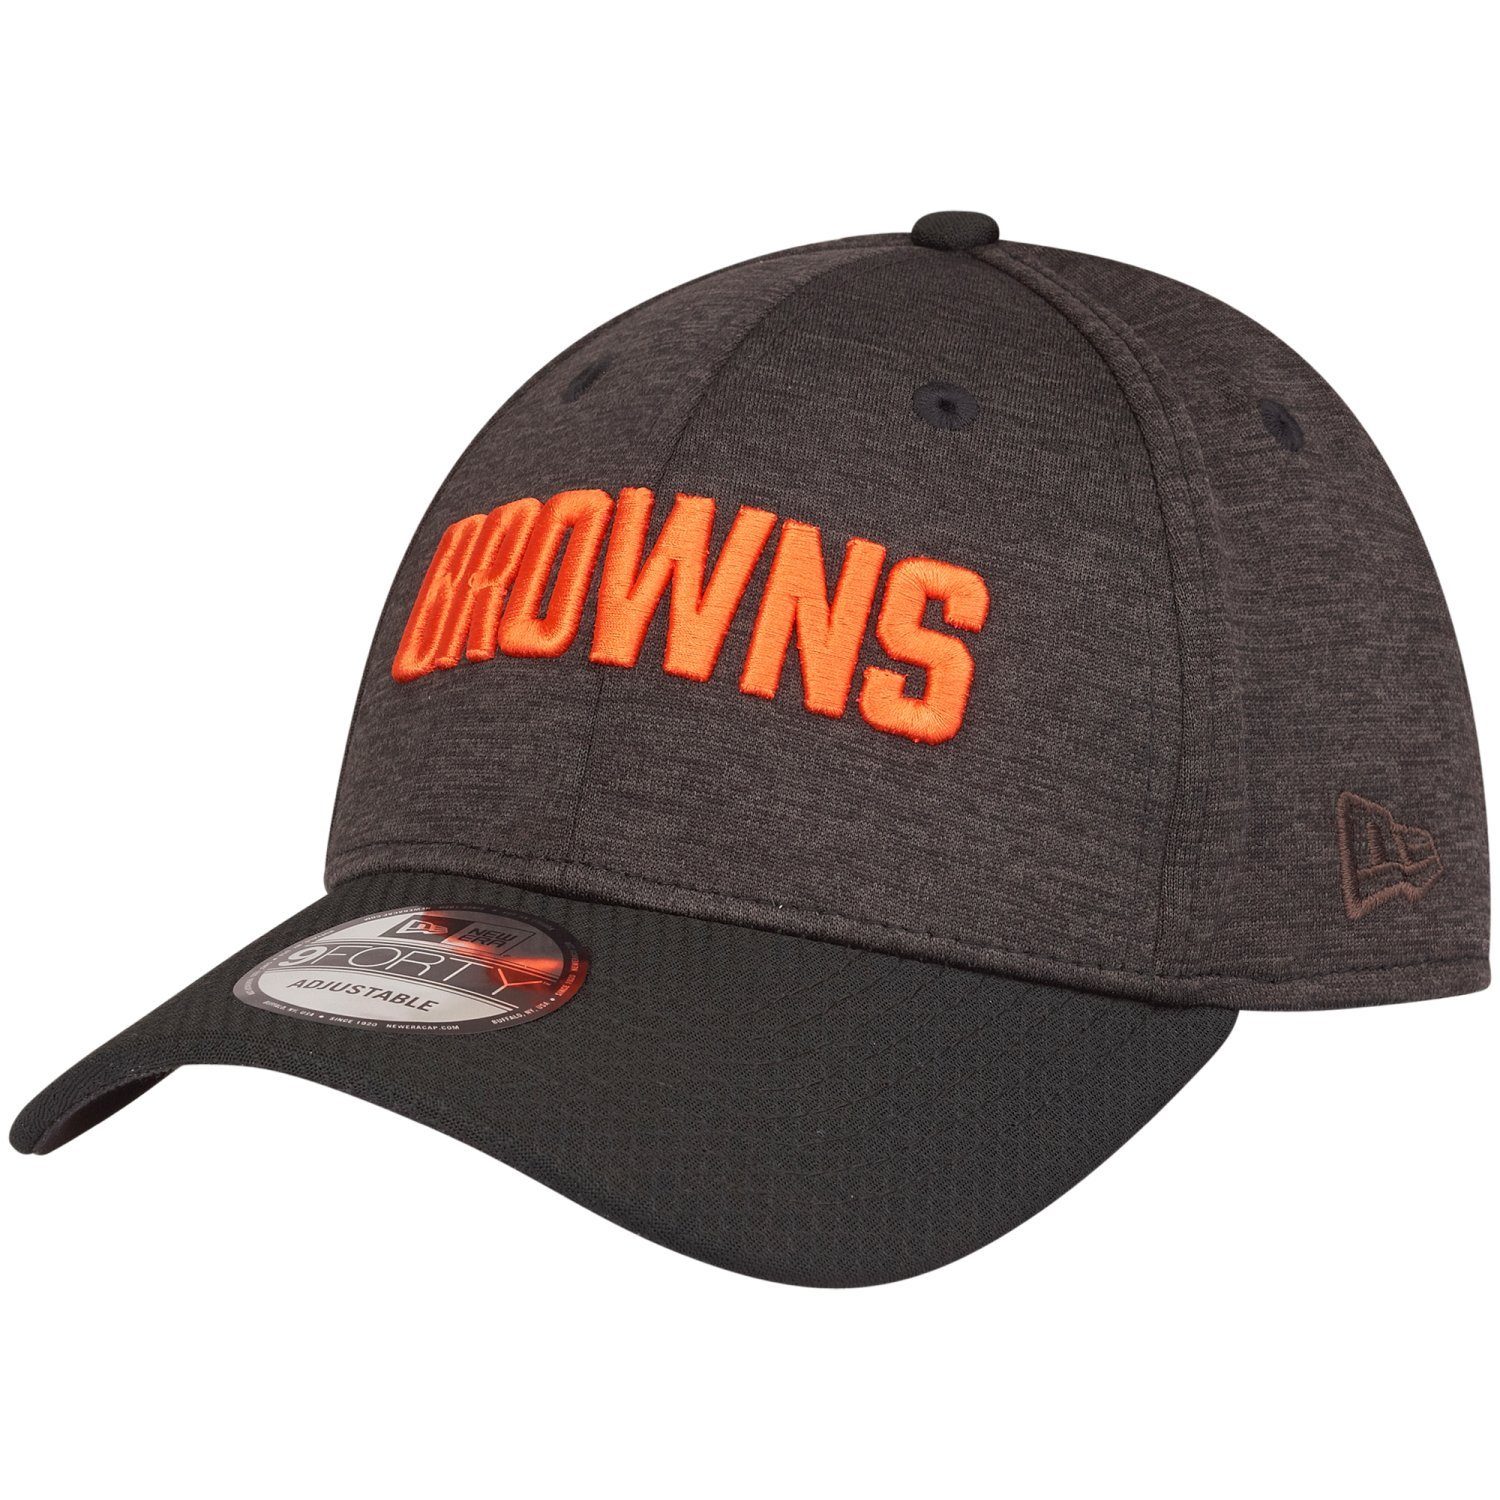 SHADOW Browns Teams Era Hex New NFL Cleveland Trucker 9Forty Tech Strapback Cap